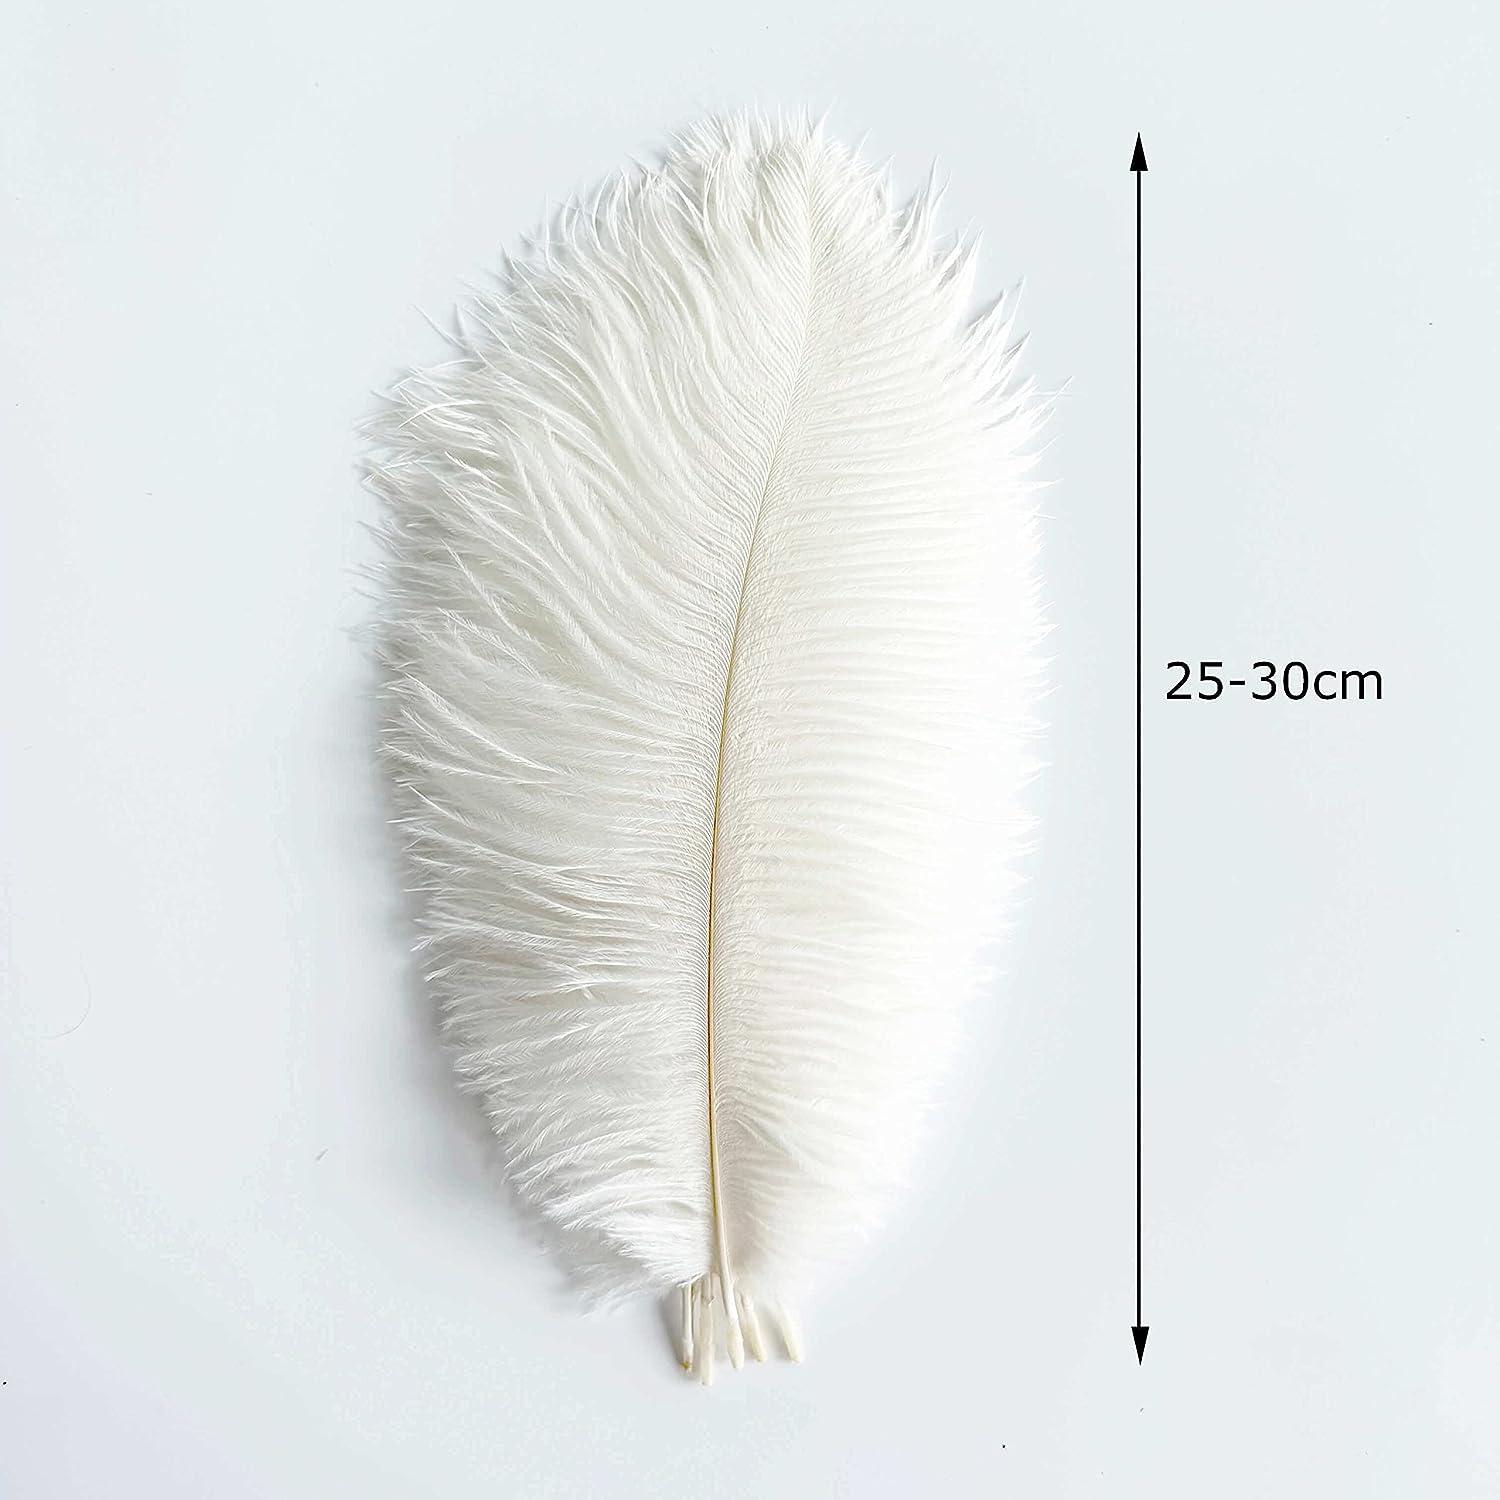 Piokio 100 Pcs Natural Peacock Feathers in Bulk 10 inch-12 inch for Wedding Crafts Christmas Decorations